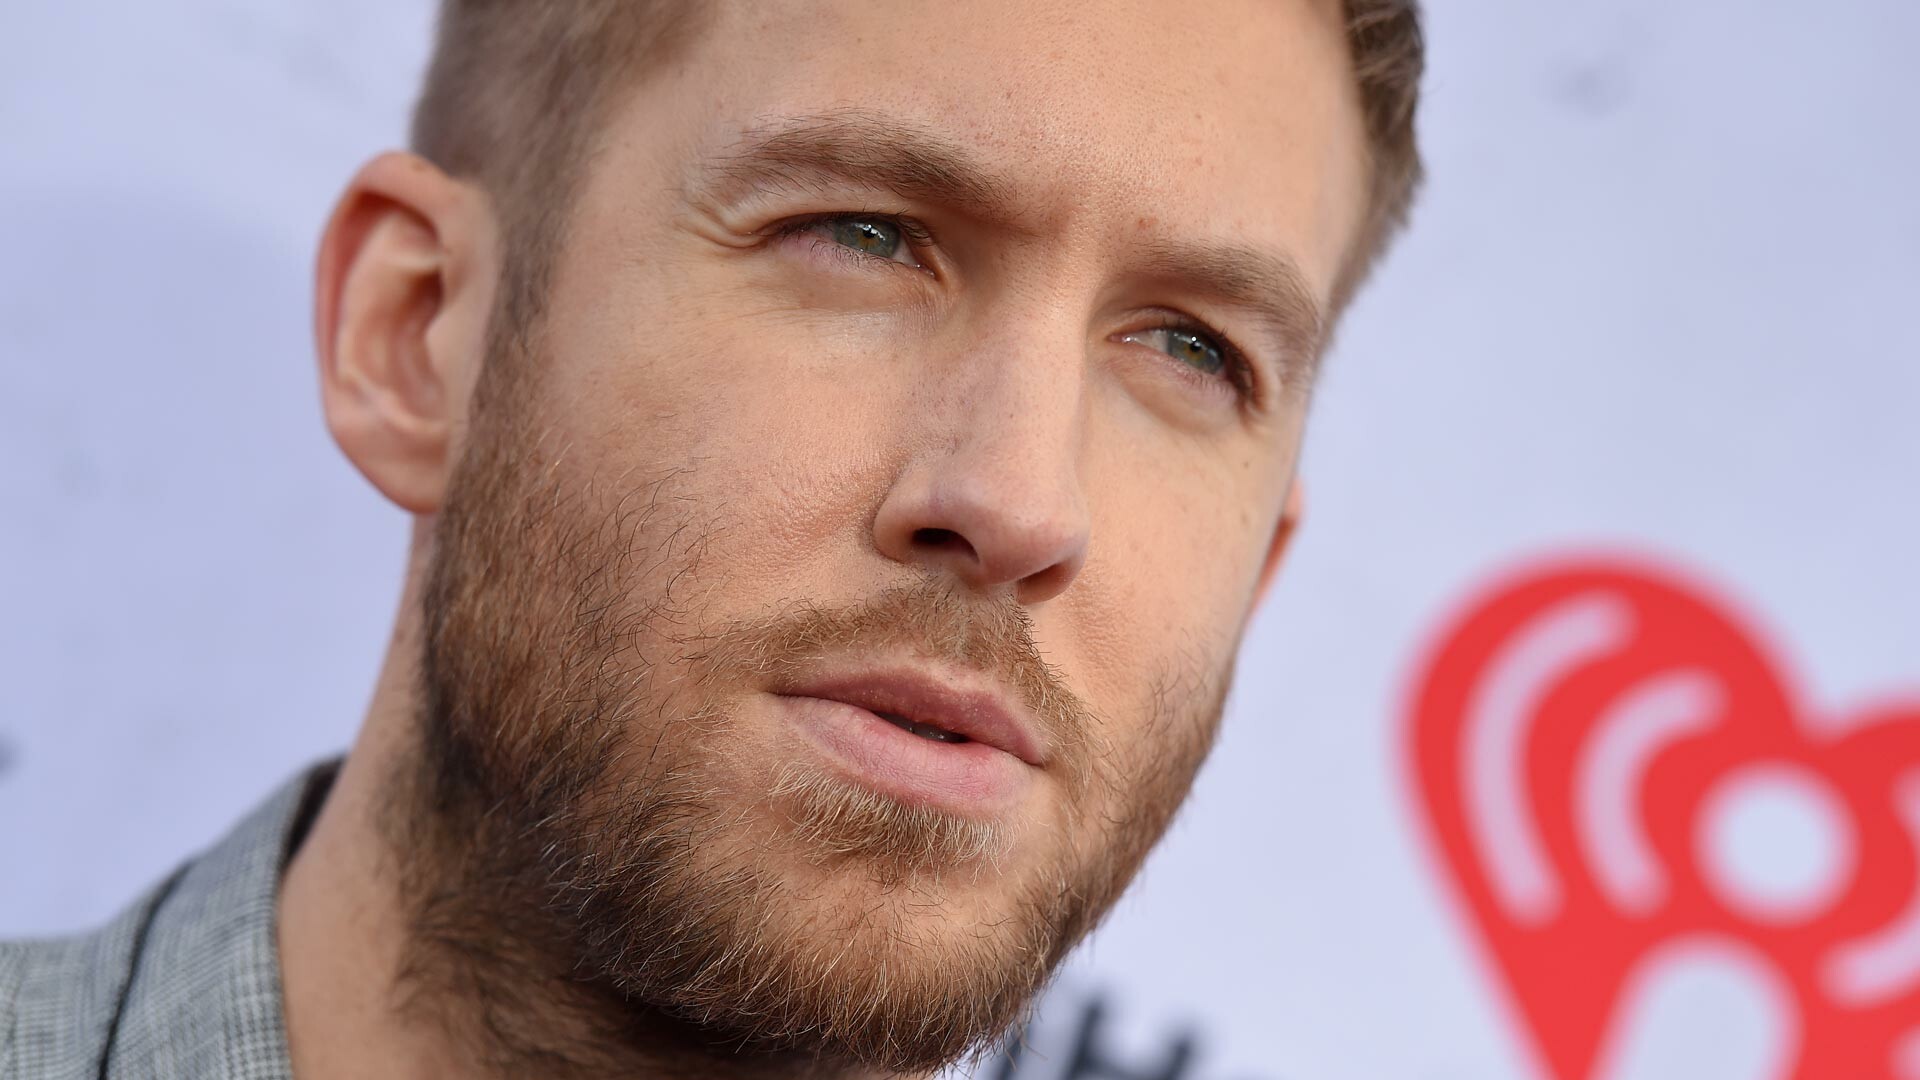 Calvin Harris: "I'm Not Alone" became his first song to top the UK Singles Chart. 1920x1080 Full HD Background.